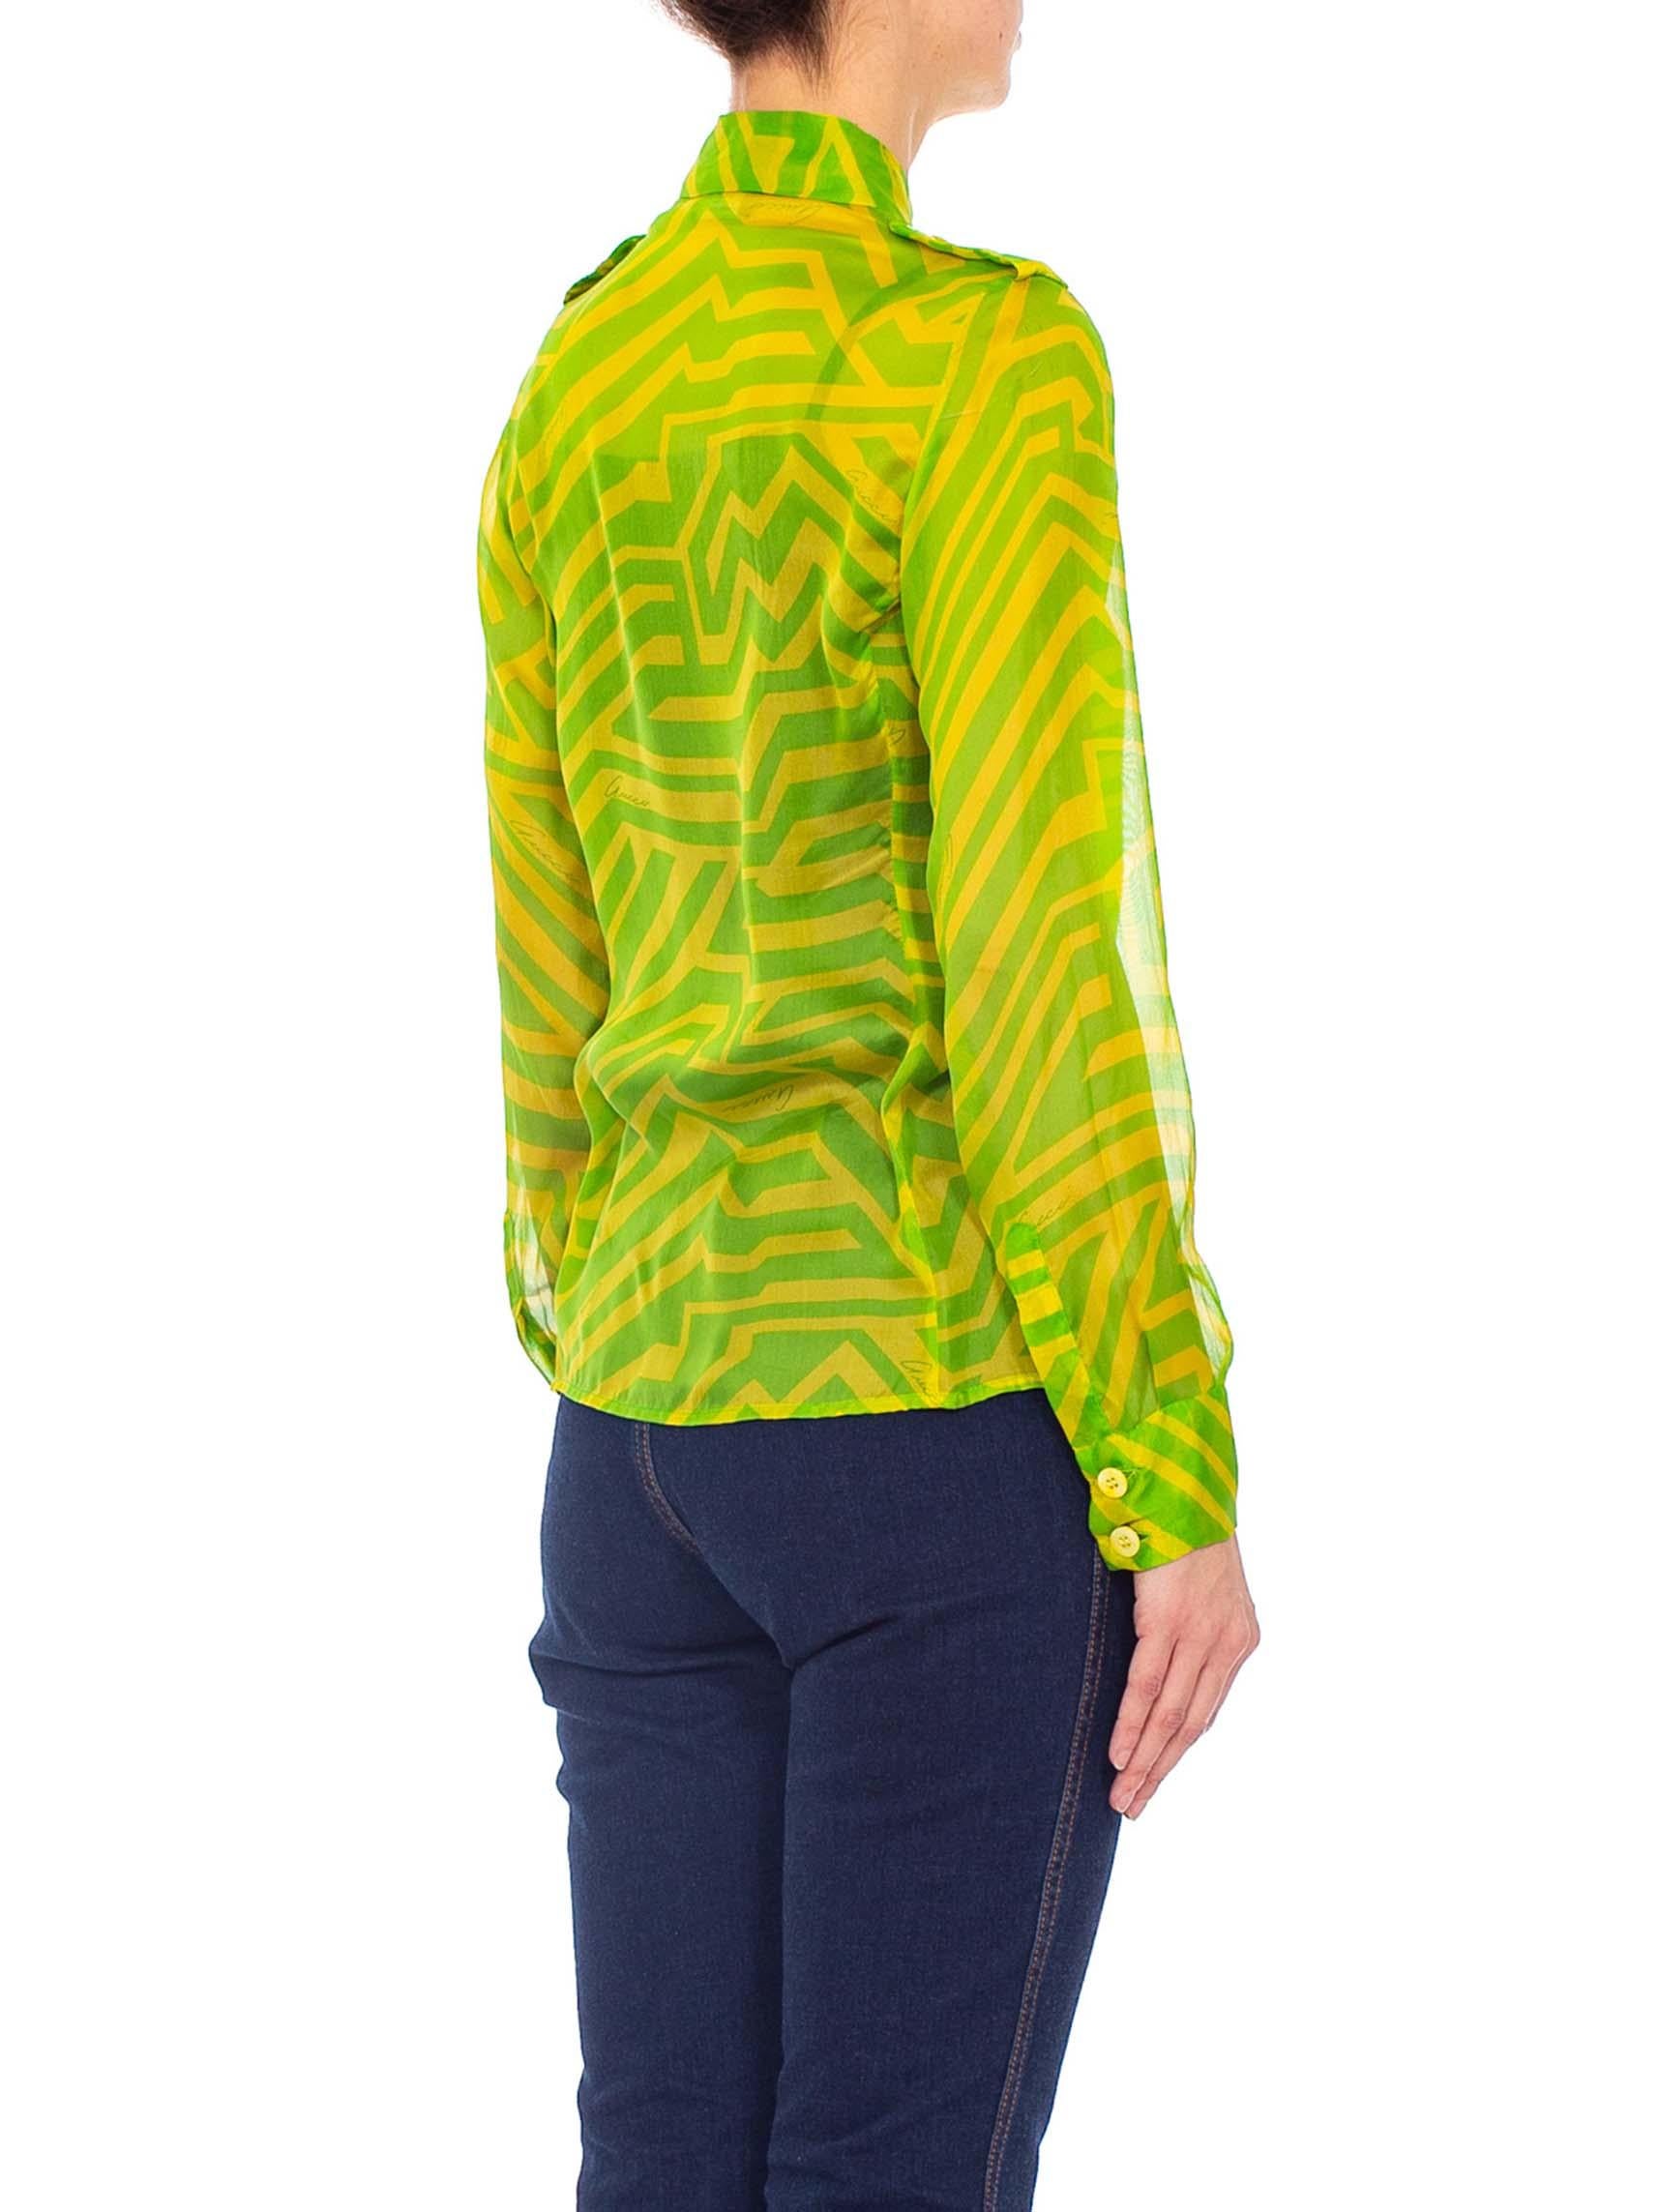 1990S TOM FORD GUCCI Lime Green Silk Chiffon Shirt From His First Collection For 3